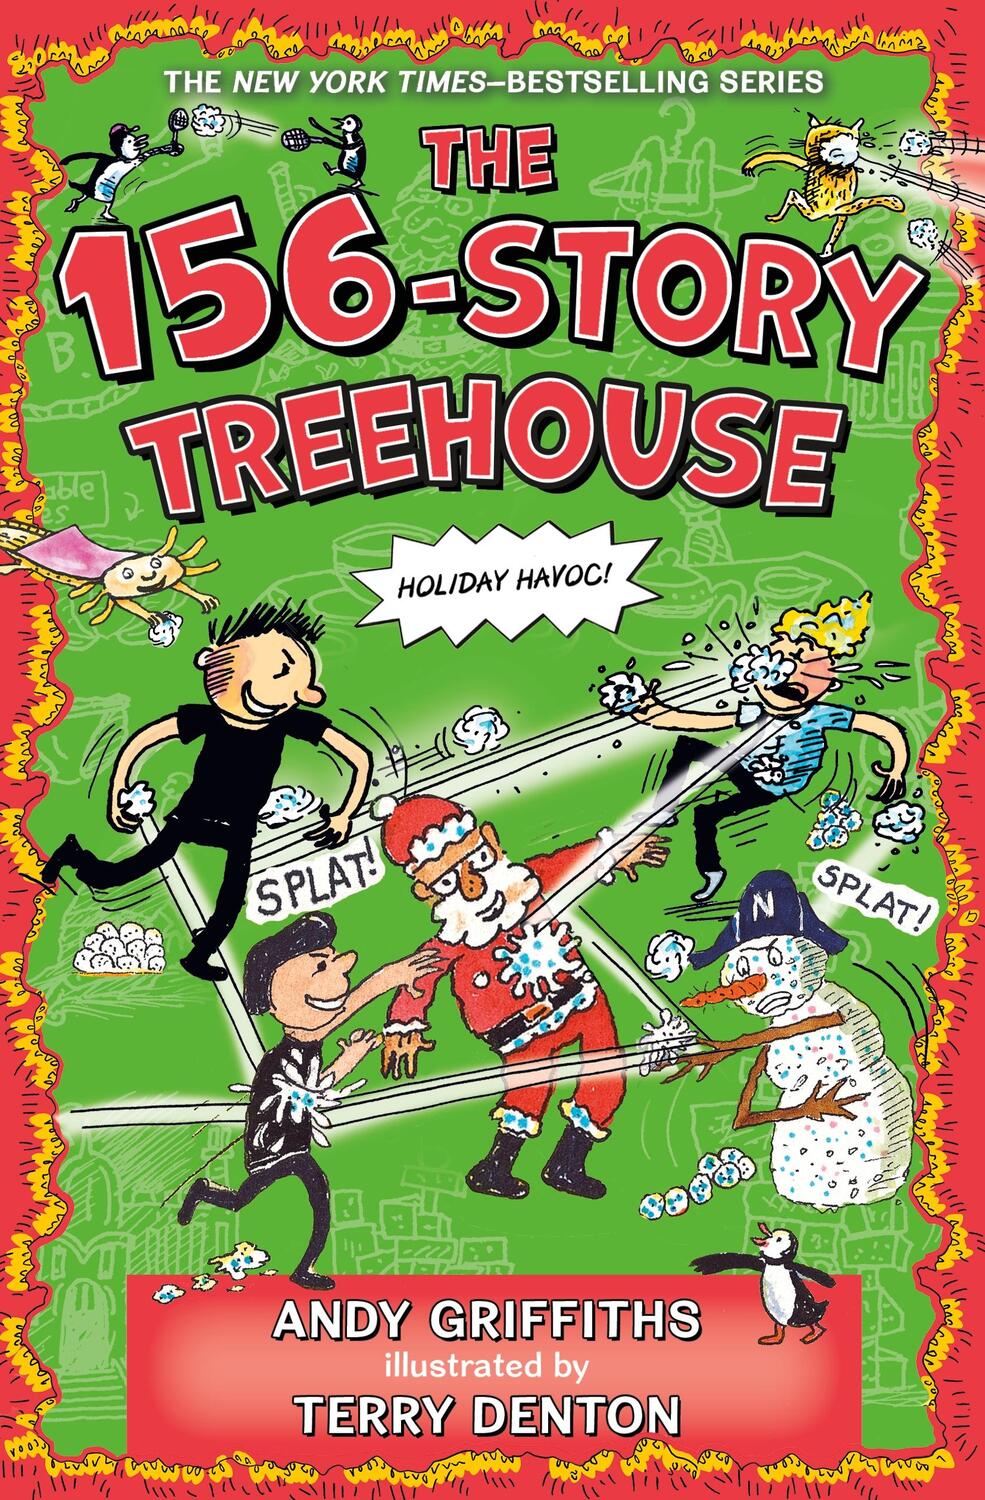 Autor: 9781250850188 | The 156-Story Treehouse | Holiday Havoc! | Andy Griffiths | Buch